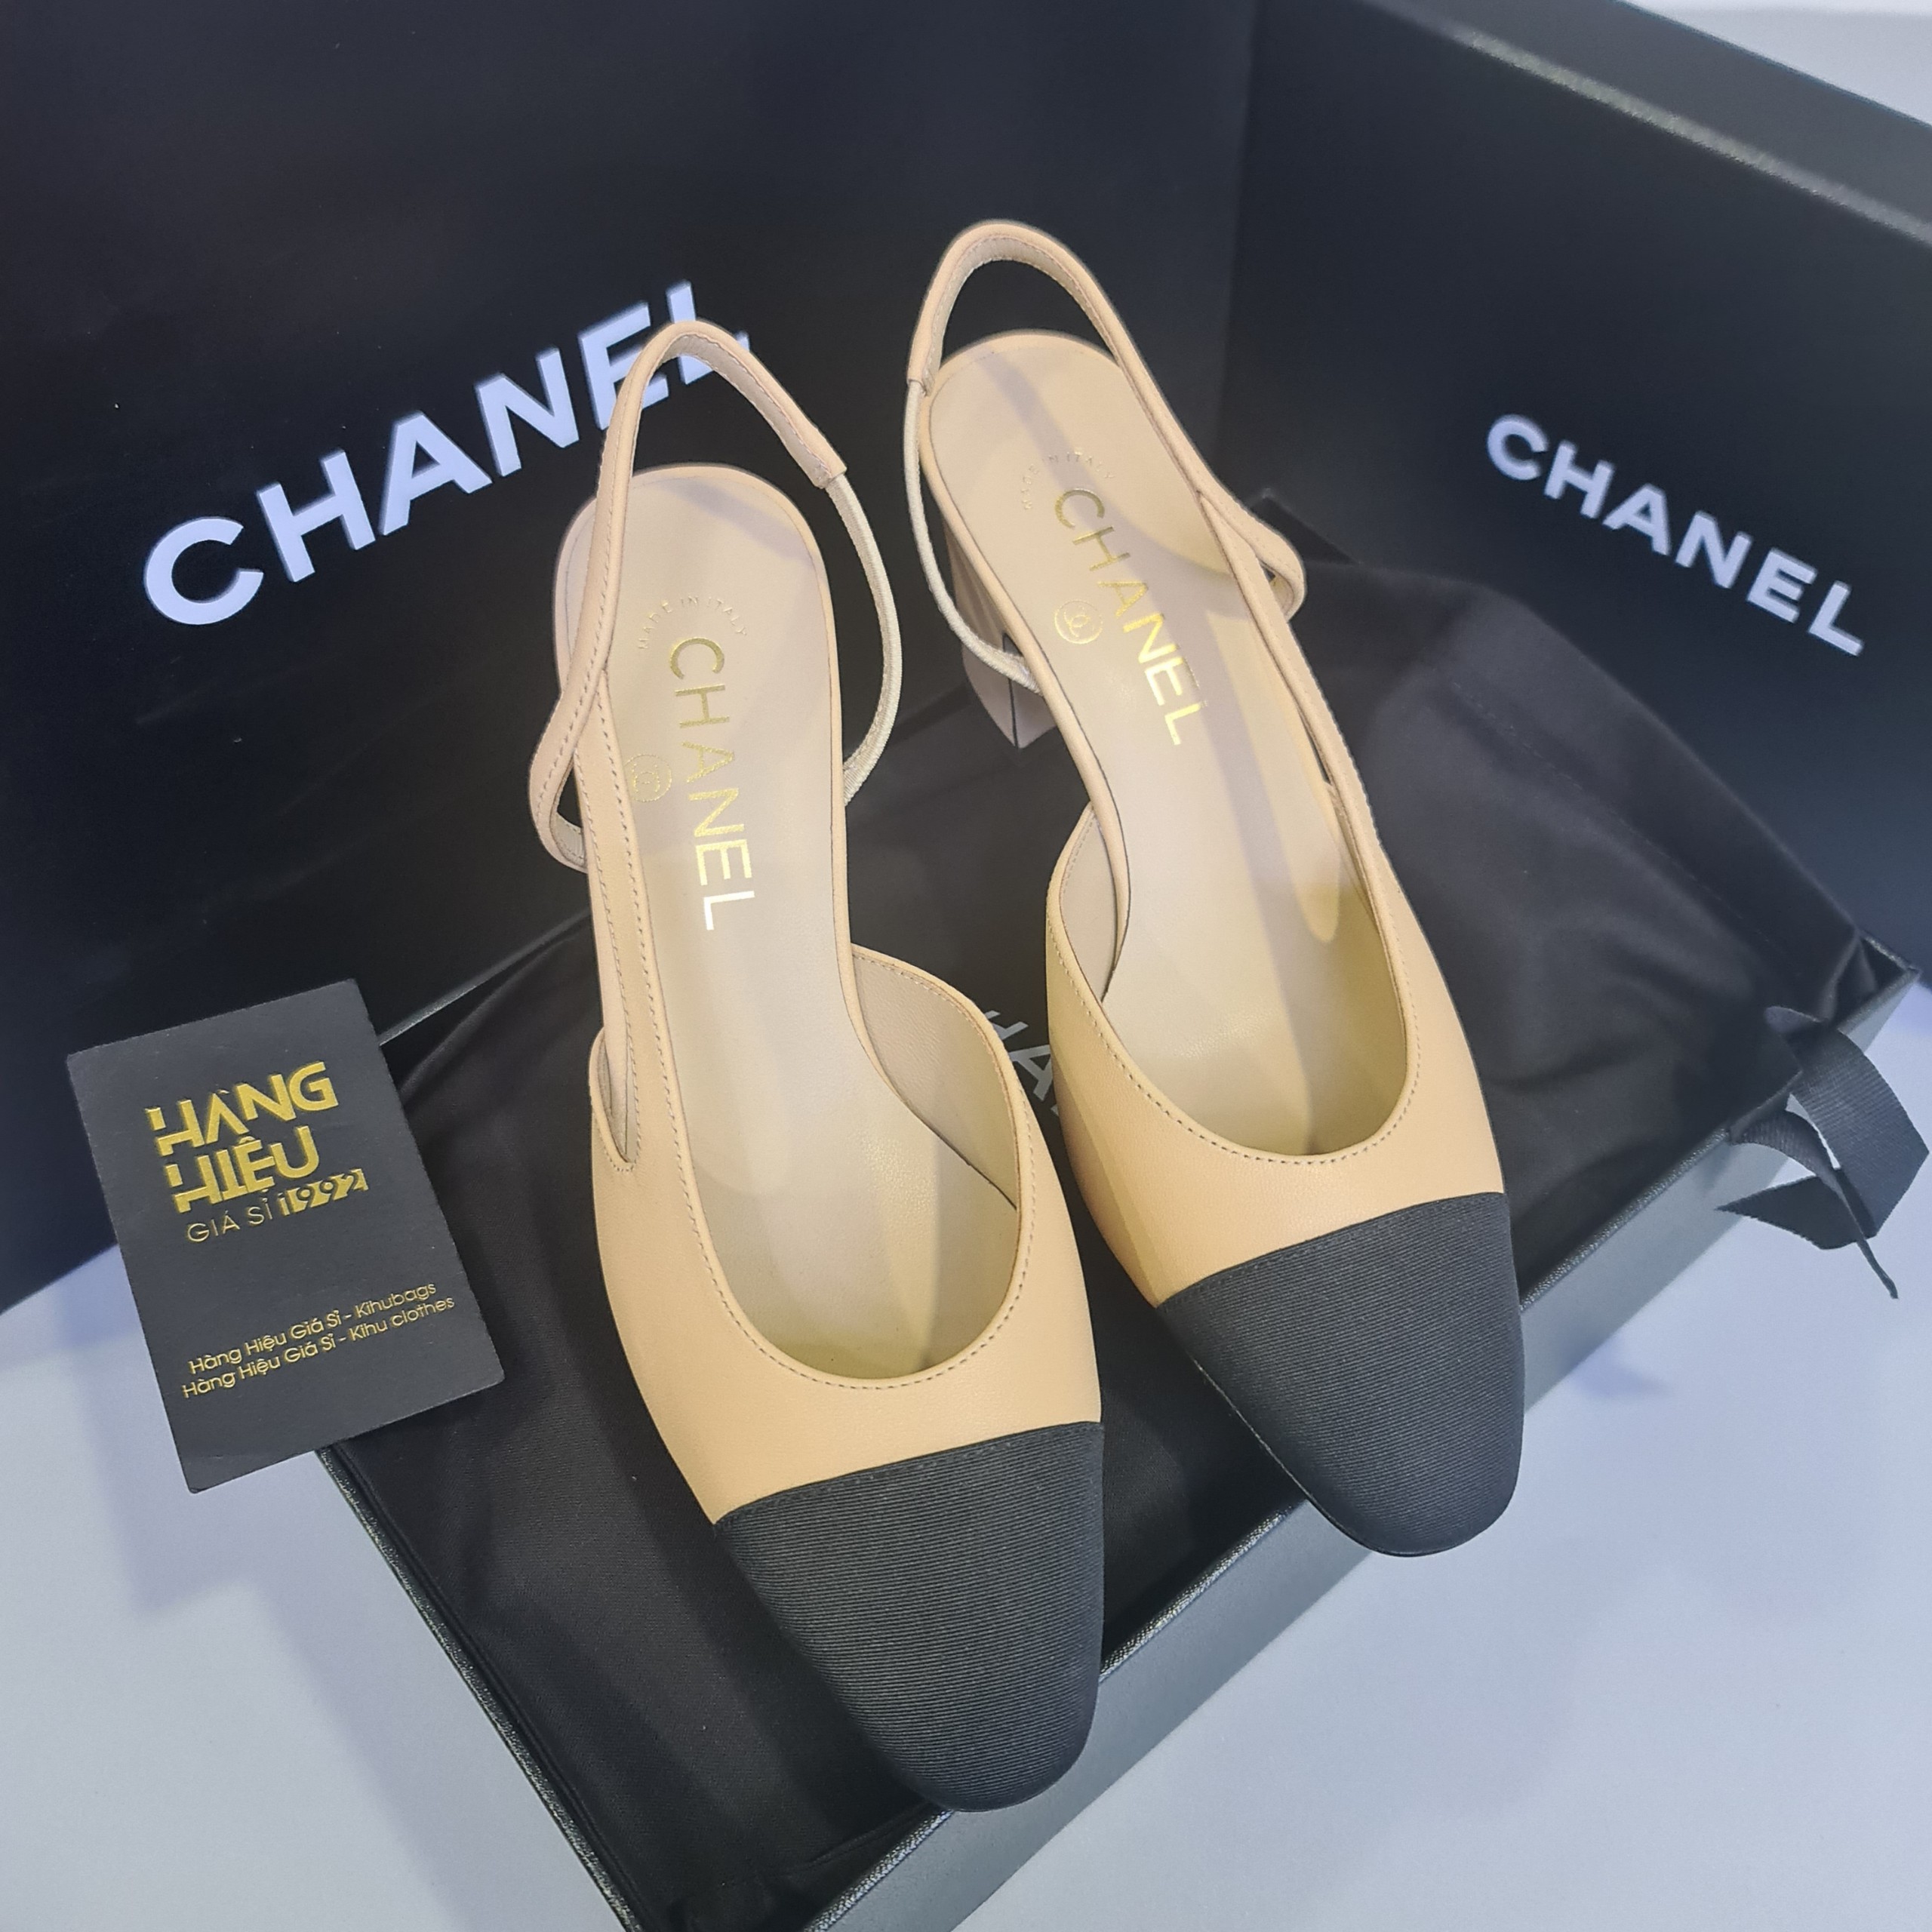 Chanel Slingback Heels Review  FAQs on Comfort Sizing and Price  Fashion  Jackson  Chanel slingback Fashion jackson Black heels outfit